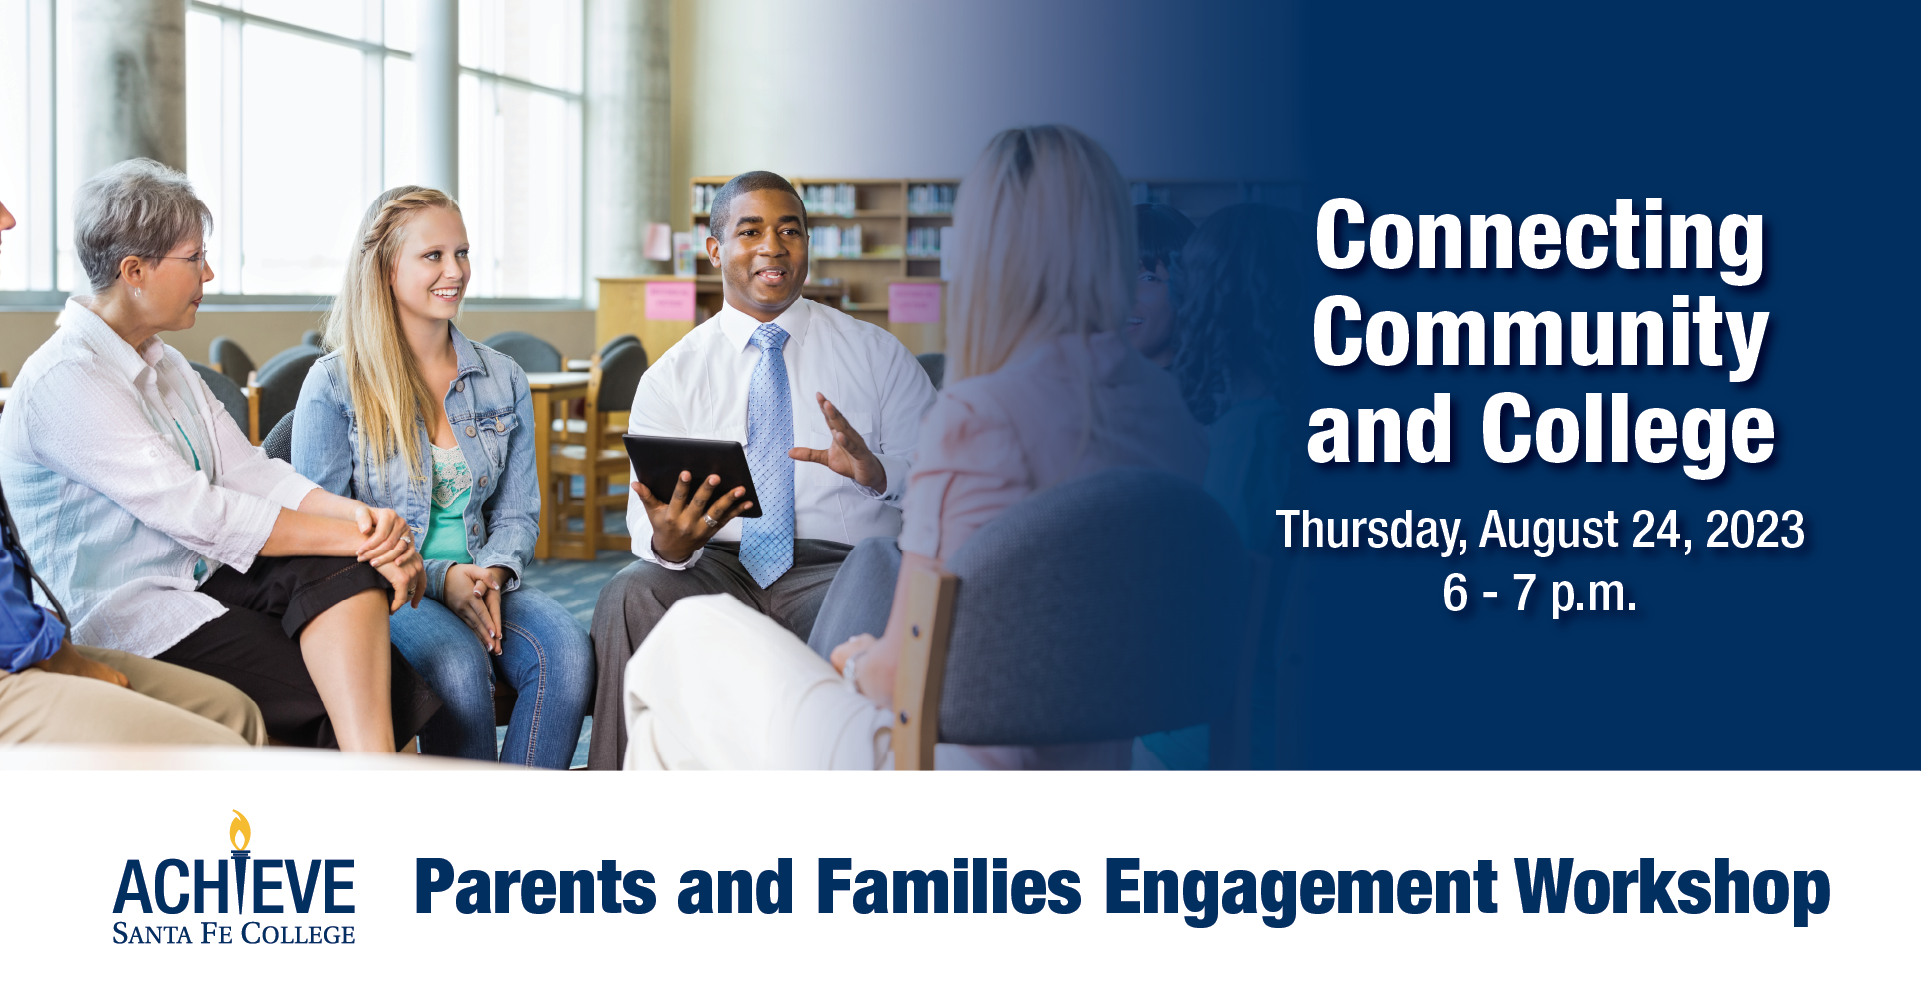 Parents Families Connecting Community and College Engagement Workshop